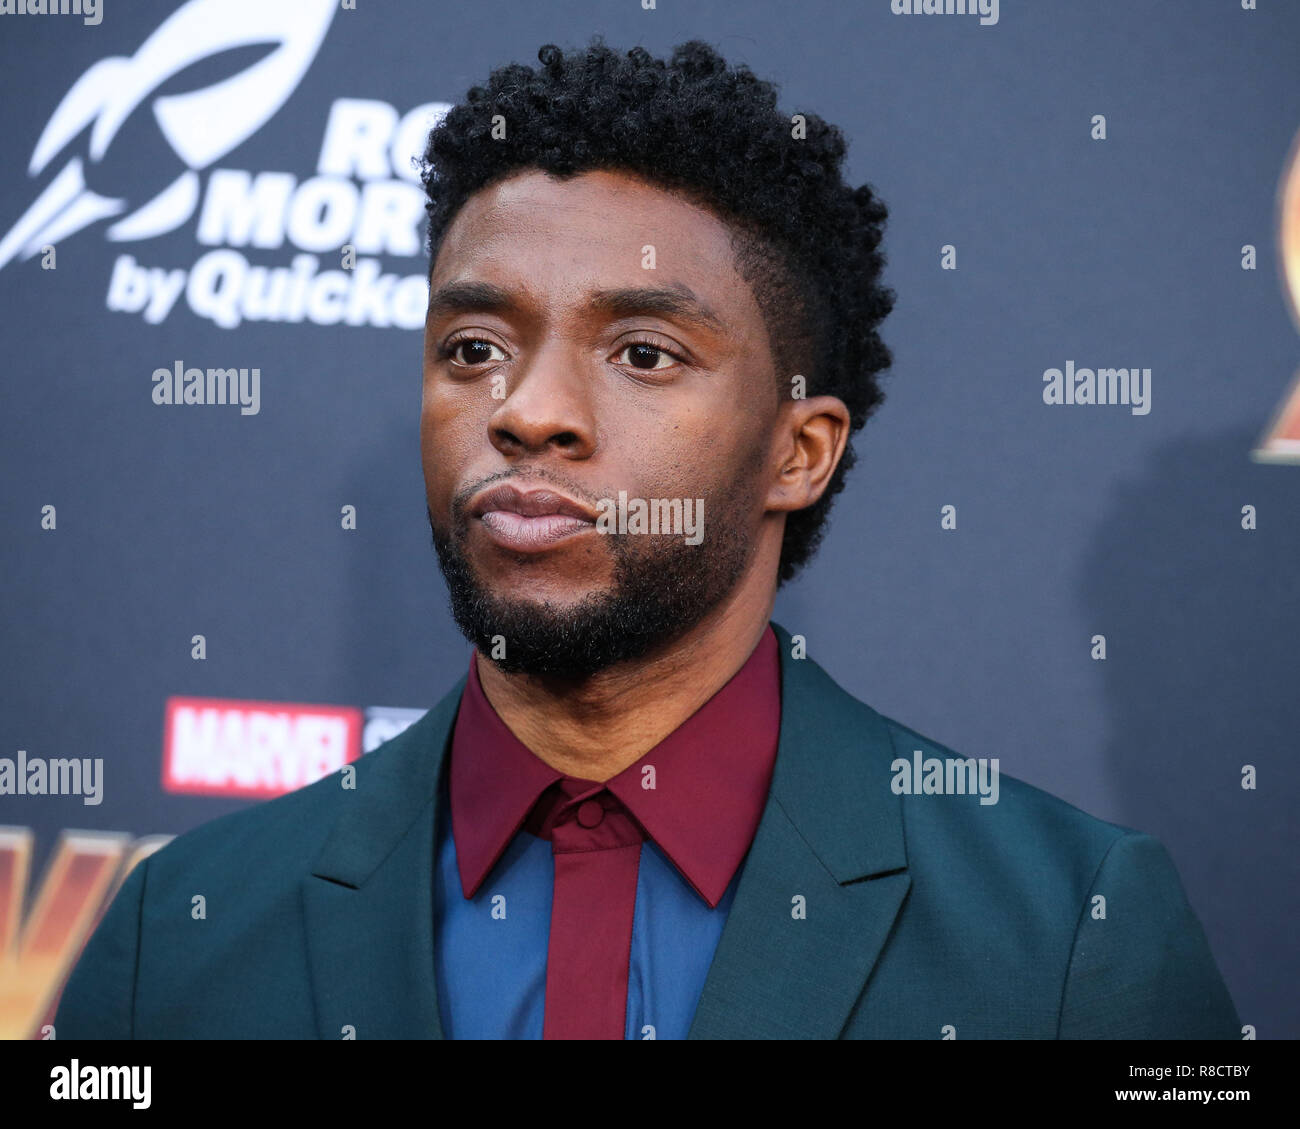 HOLLYWOOD, LOS ANGELES, CA, USA - APRIL 23: Chadwick Boseman at the World Premiere Of Disney And Marvel's 'Avengers: Infinity War' held at the El Capitan Theatre, Dolby Theatre and TCL Chinese Theatre IMAX on April 23, 2018 in Hollywood, Los Angeles, California, United States. (Photo by Xavier Collin/Image Press Agency) Stock Photo